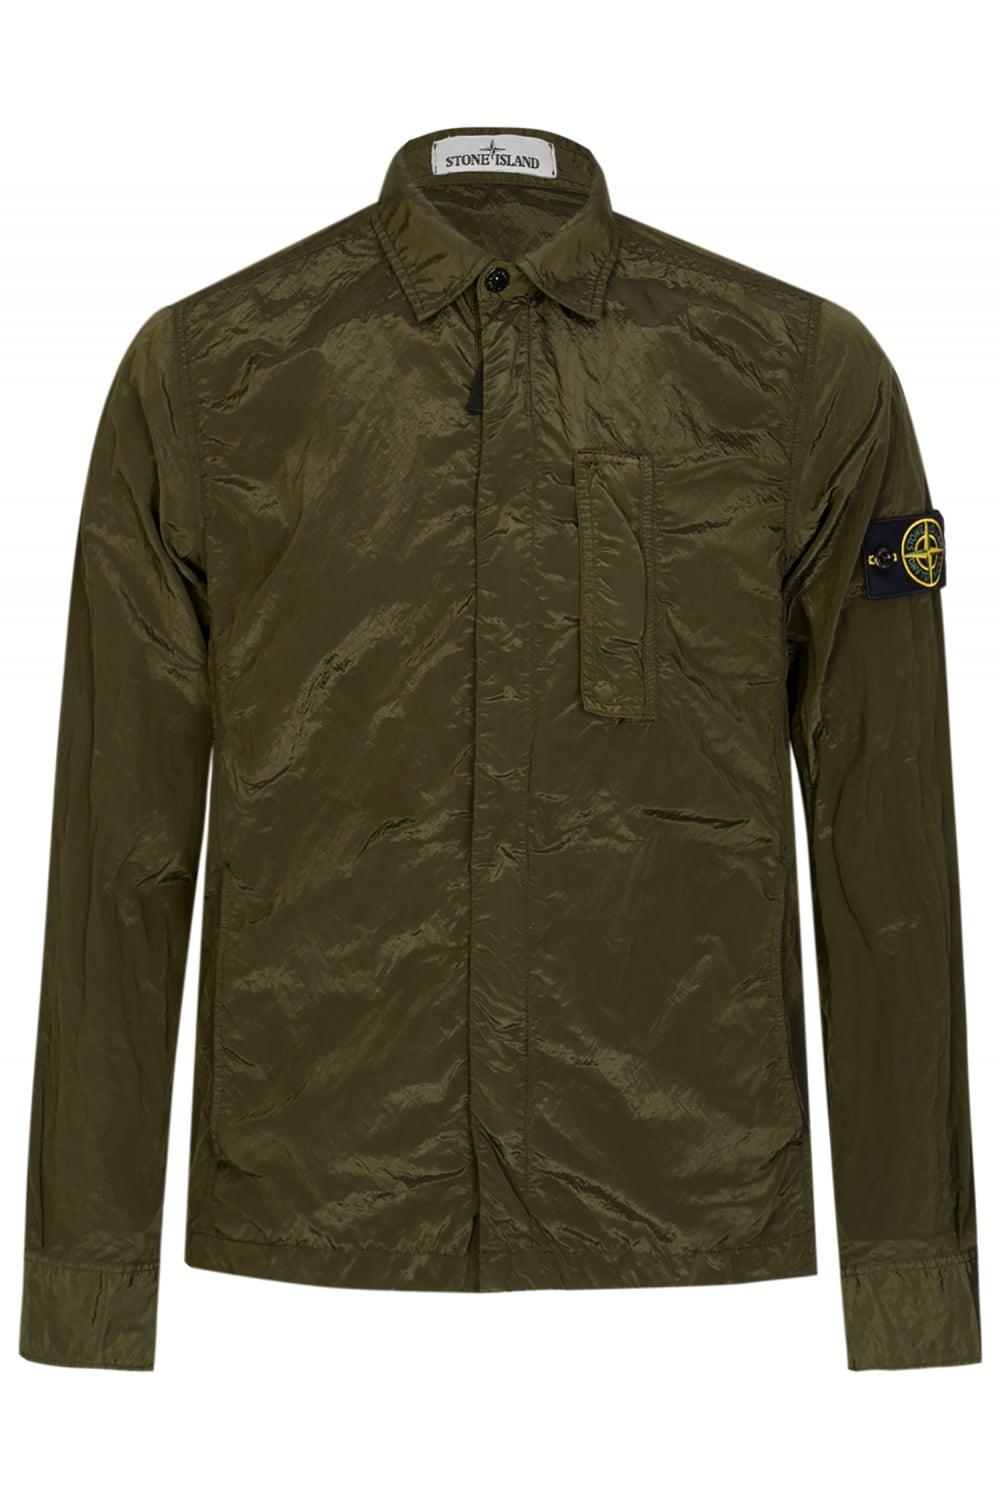 Stone Island Synthetic Patch Pocket Overshirt Khaki in Green for Men - Lyst